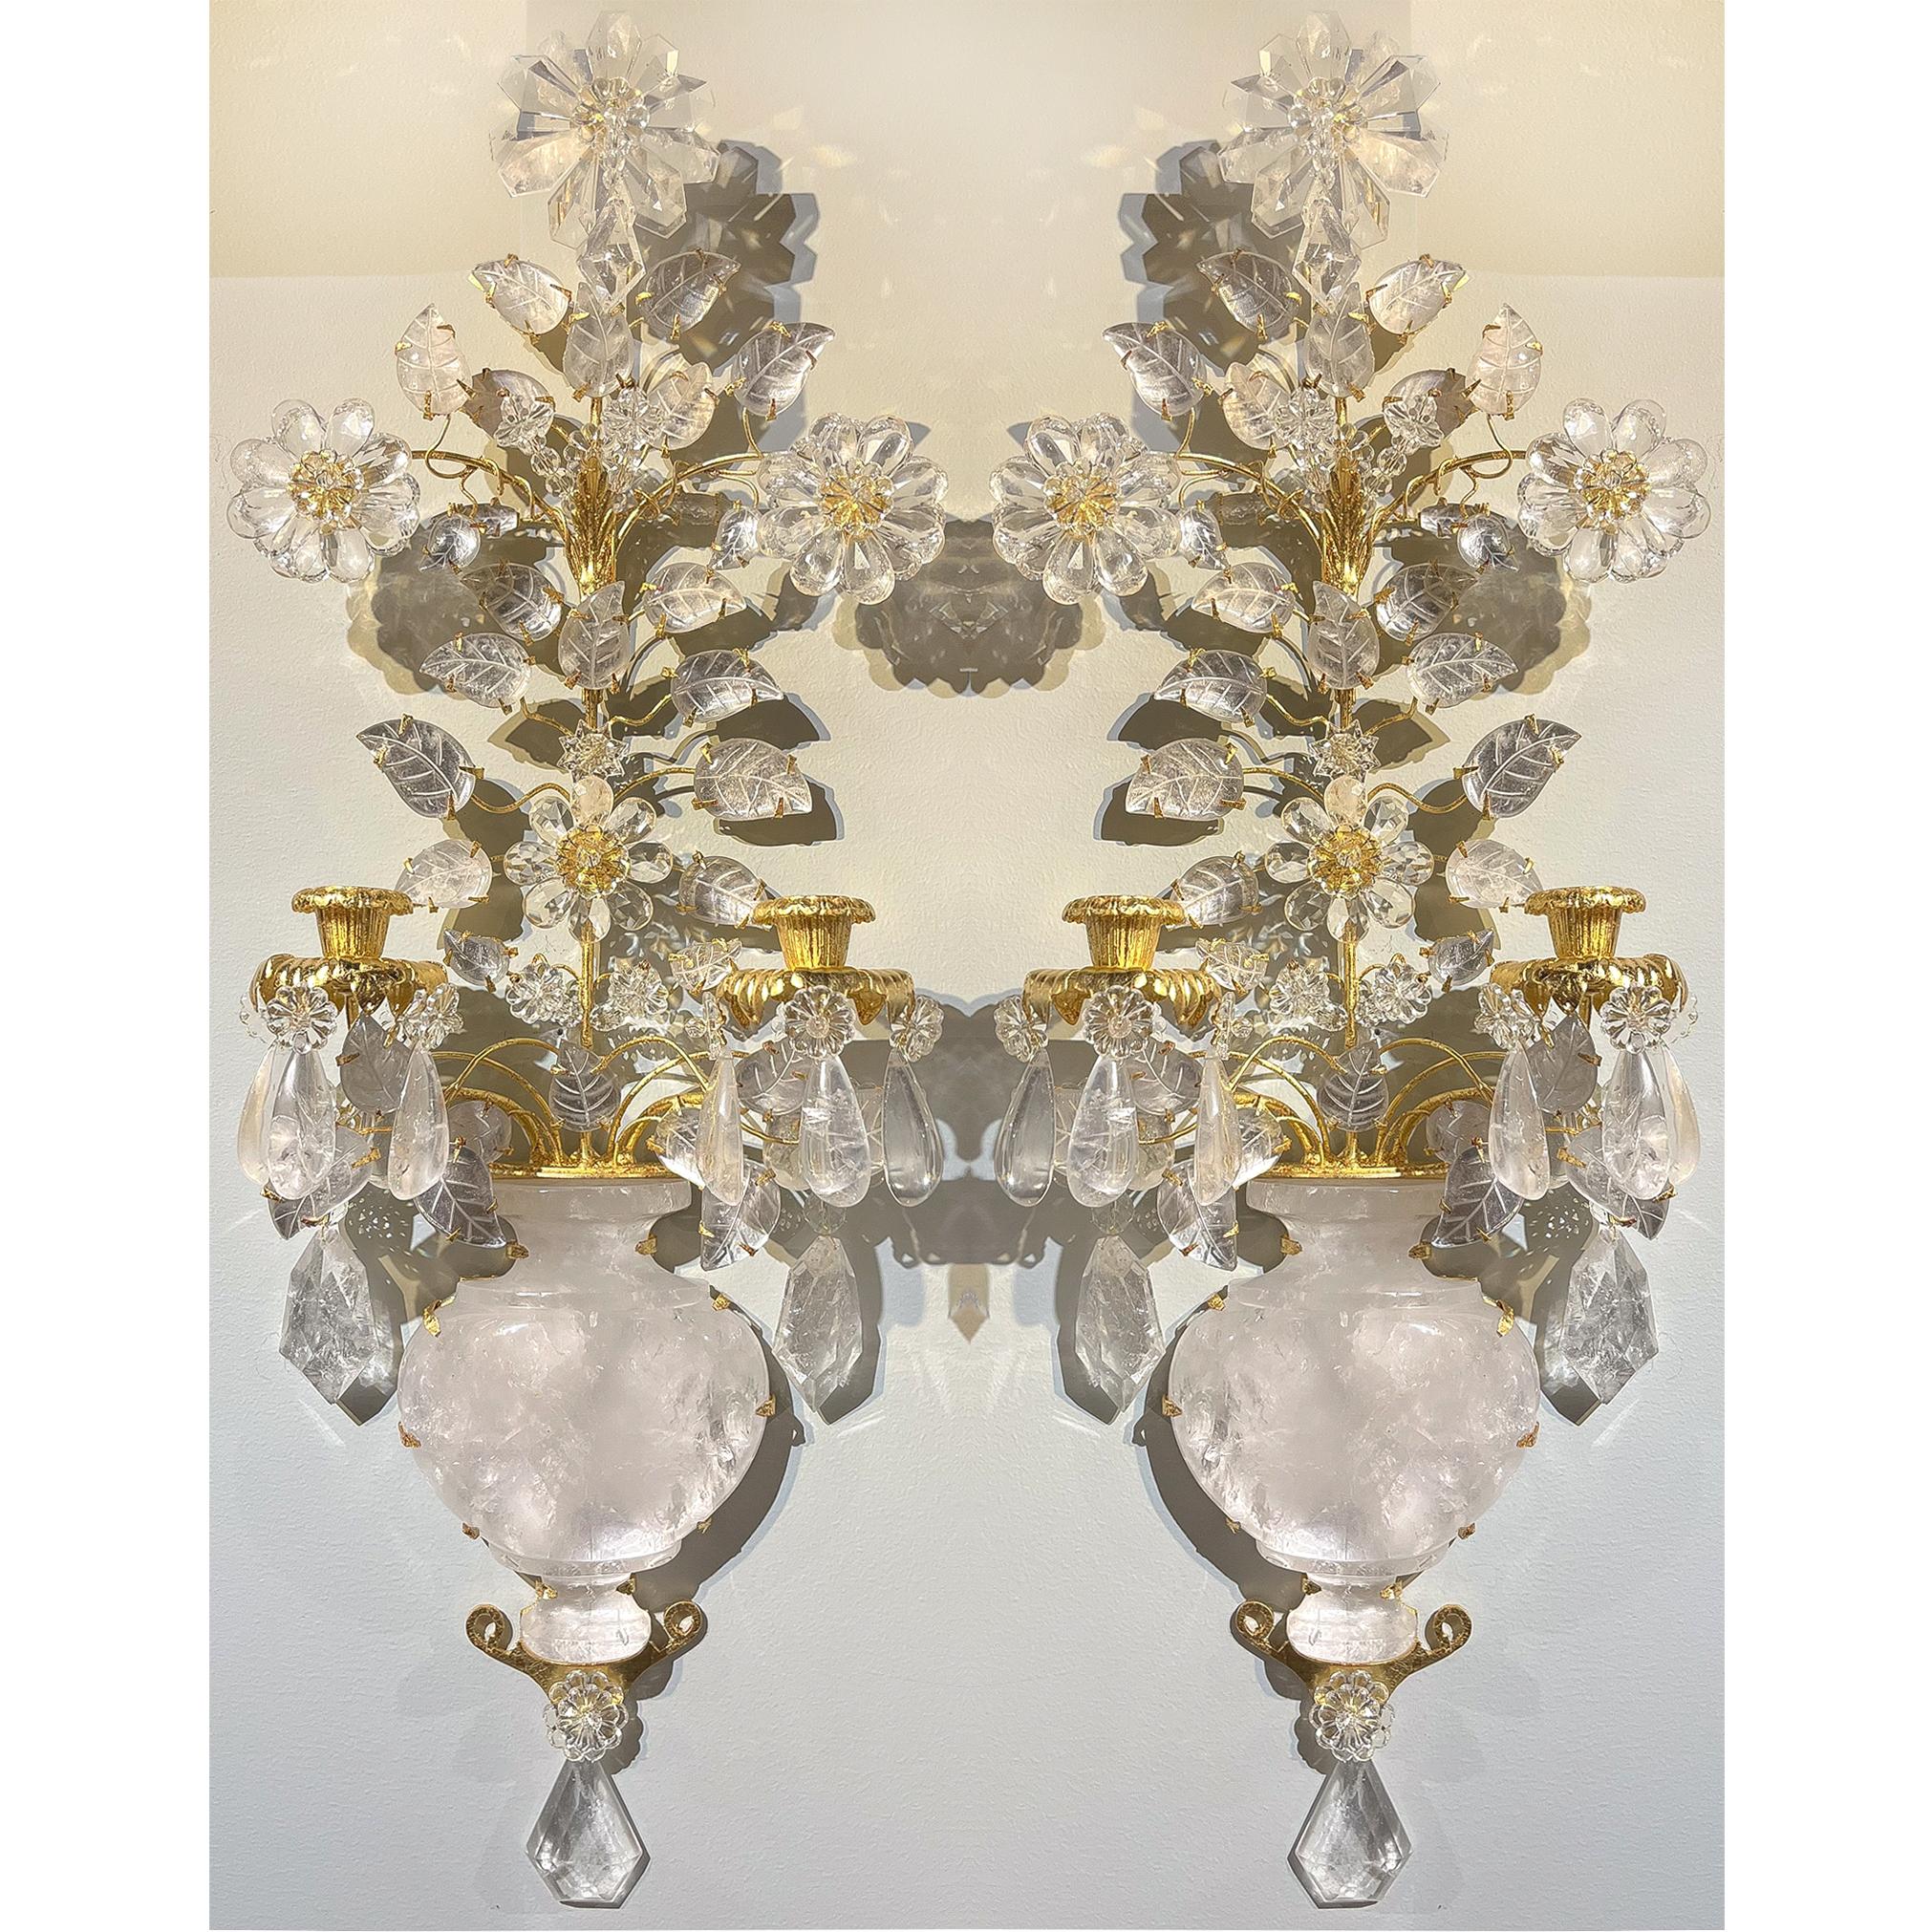 Set of four rock crystal two-light Bouquet Sconces in the form of a bellied vase with flowers. Cut crystal flowers with individual petals, and leaves with delicately carved veining, tear drop cut crystal hanging throughout the entire composition.